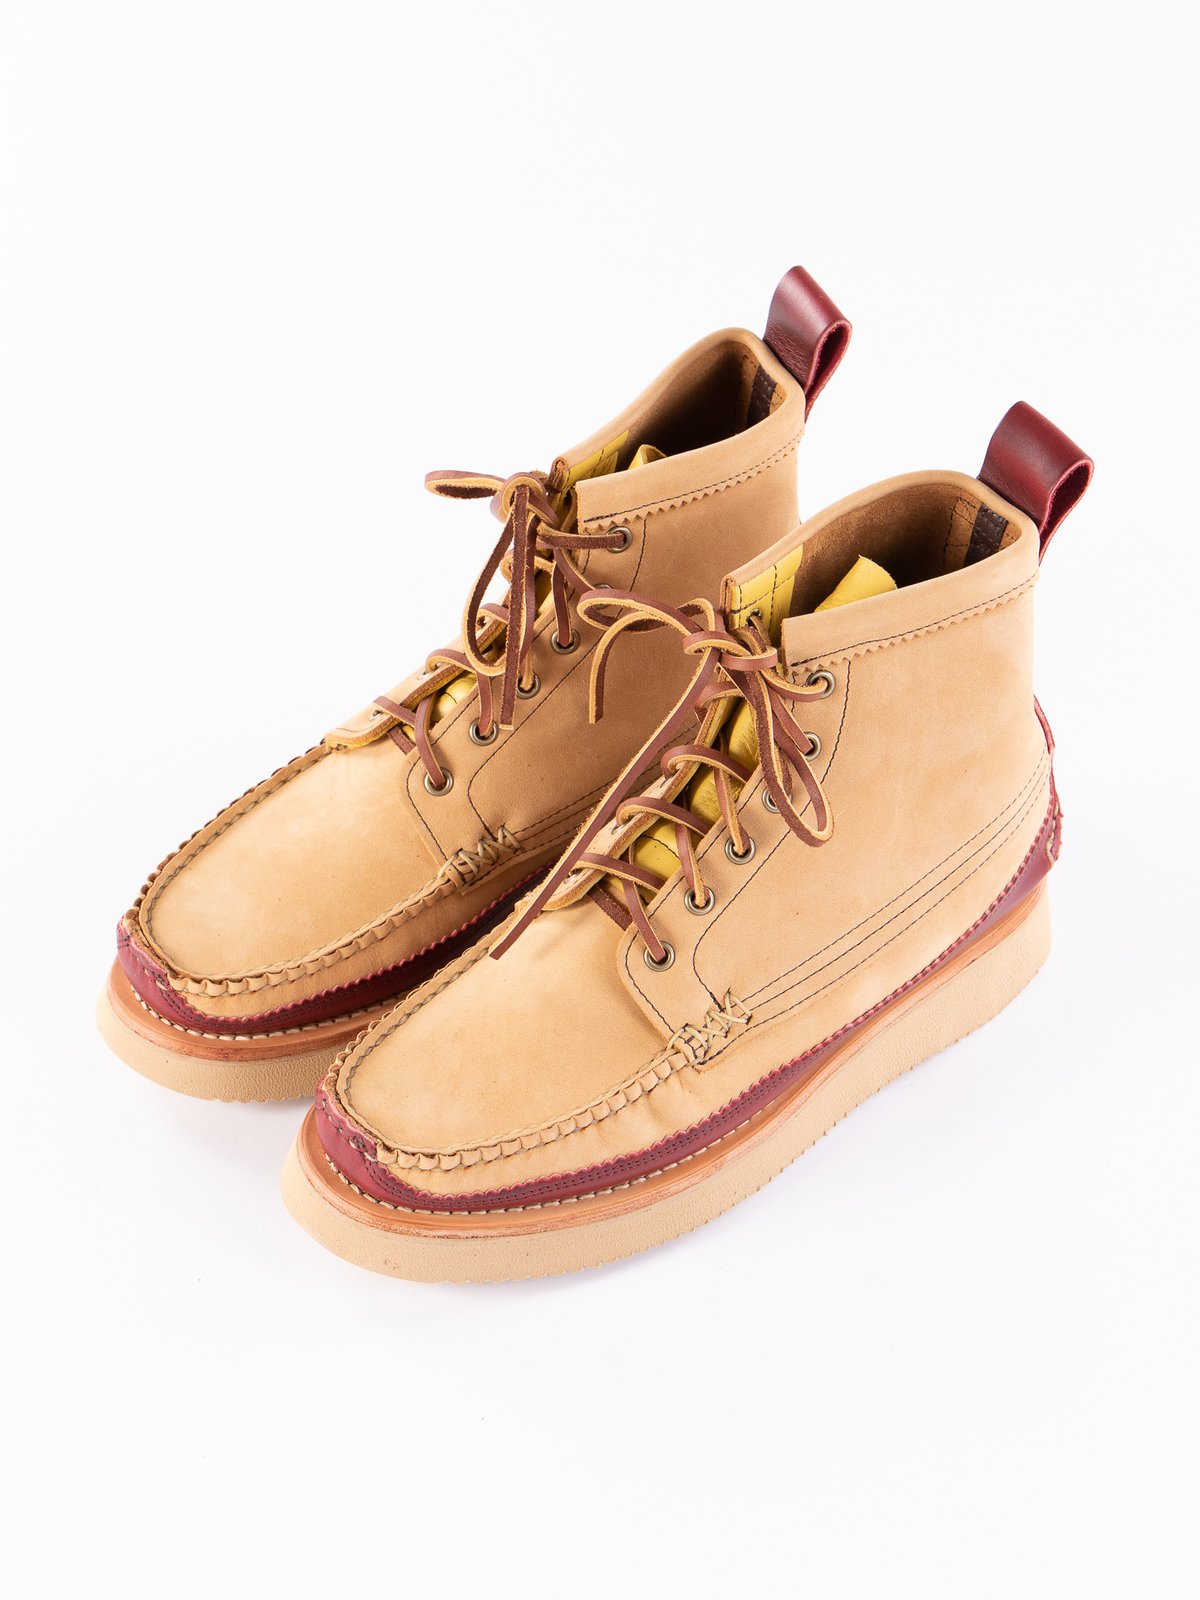 DB Brown x C Red Maine Guide 6 Eye DB Boot Exclusive - Image 2